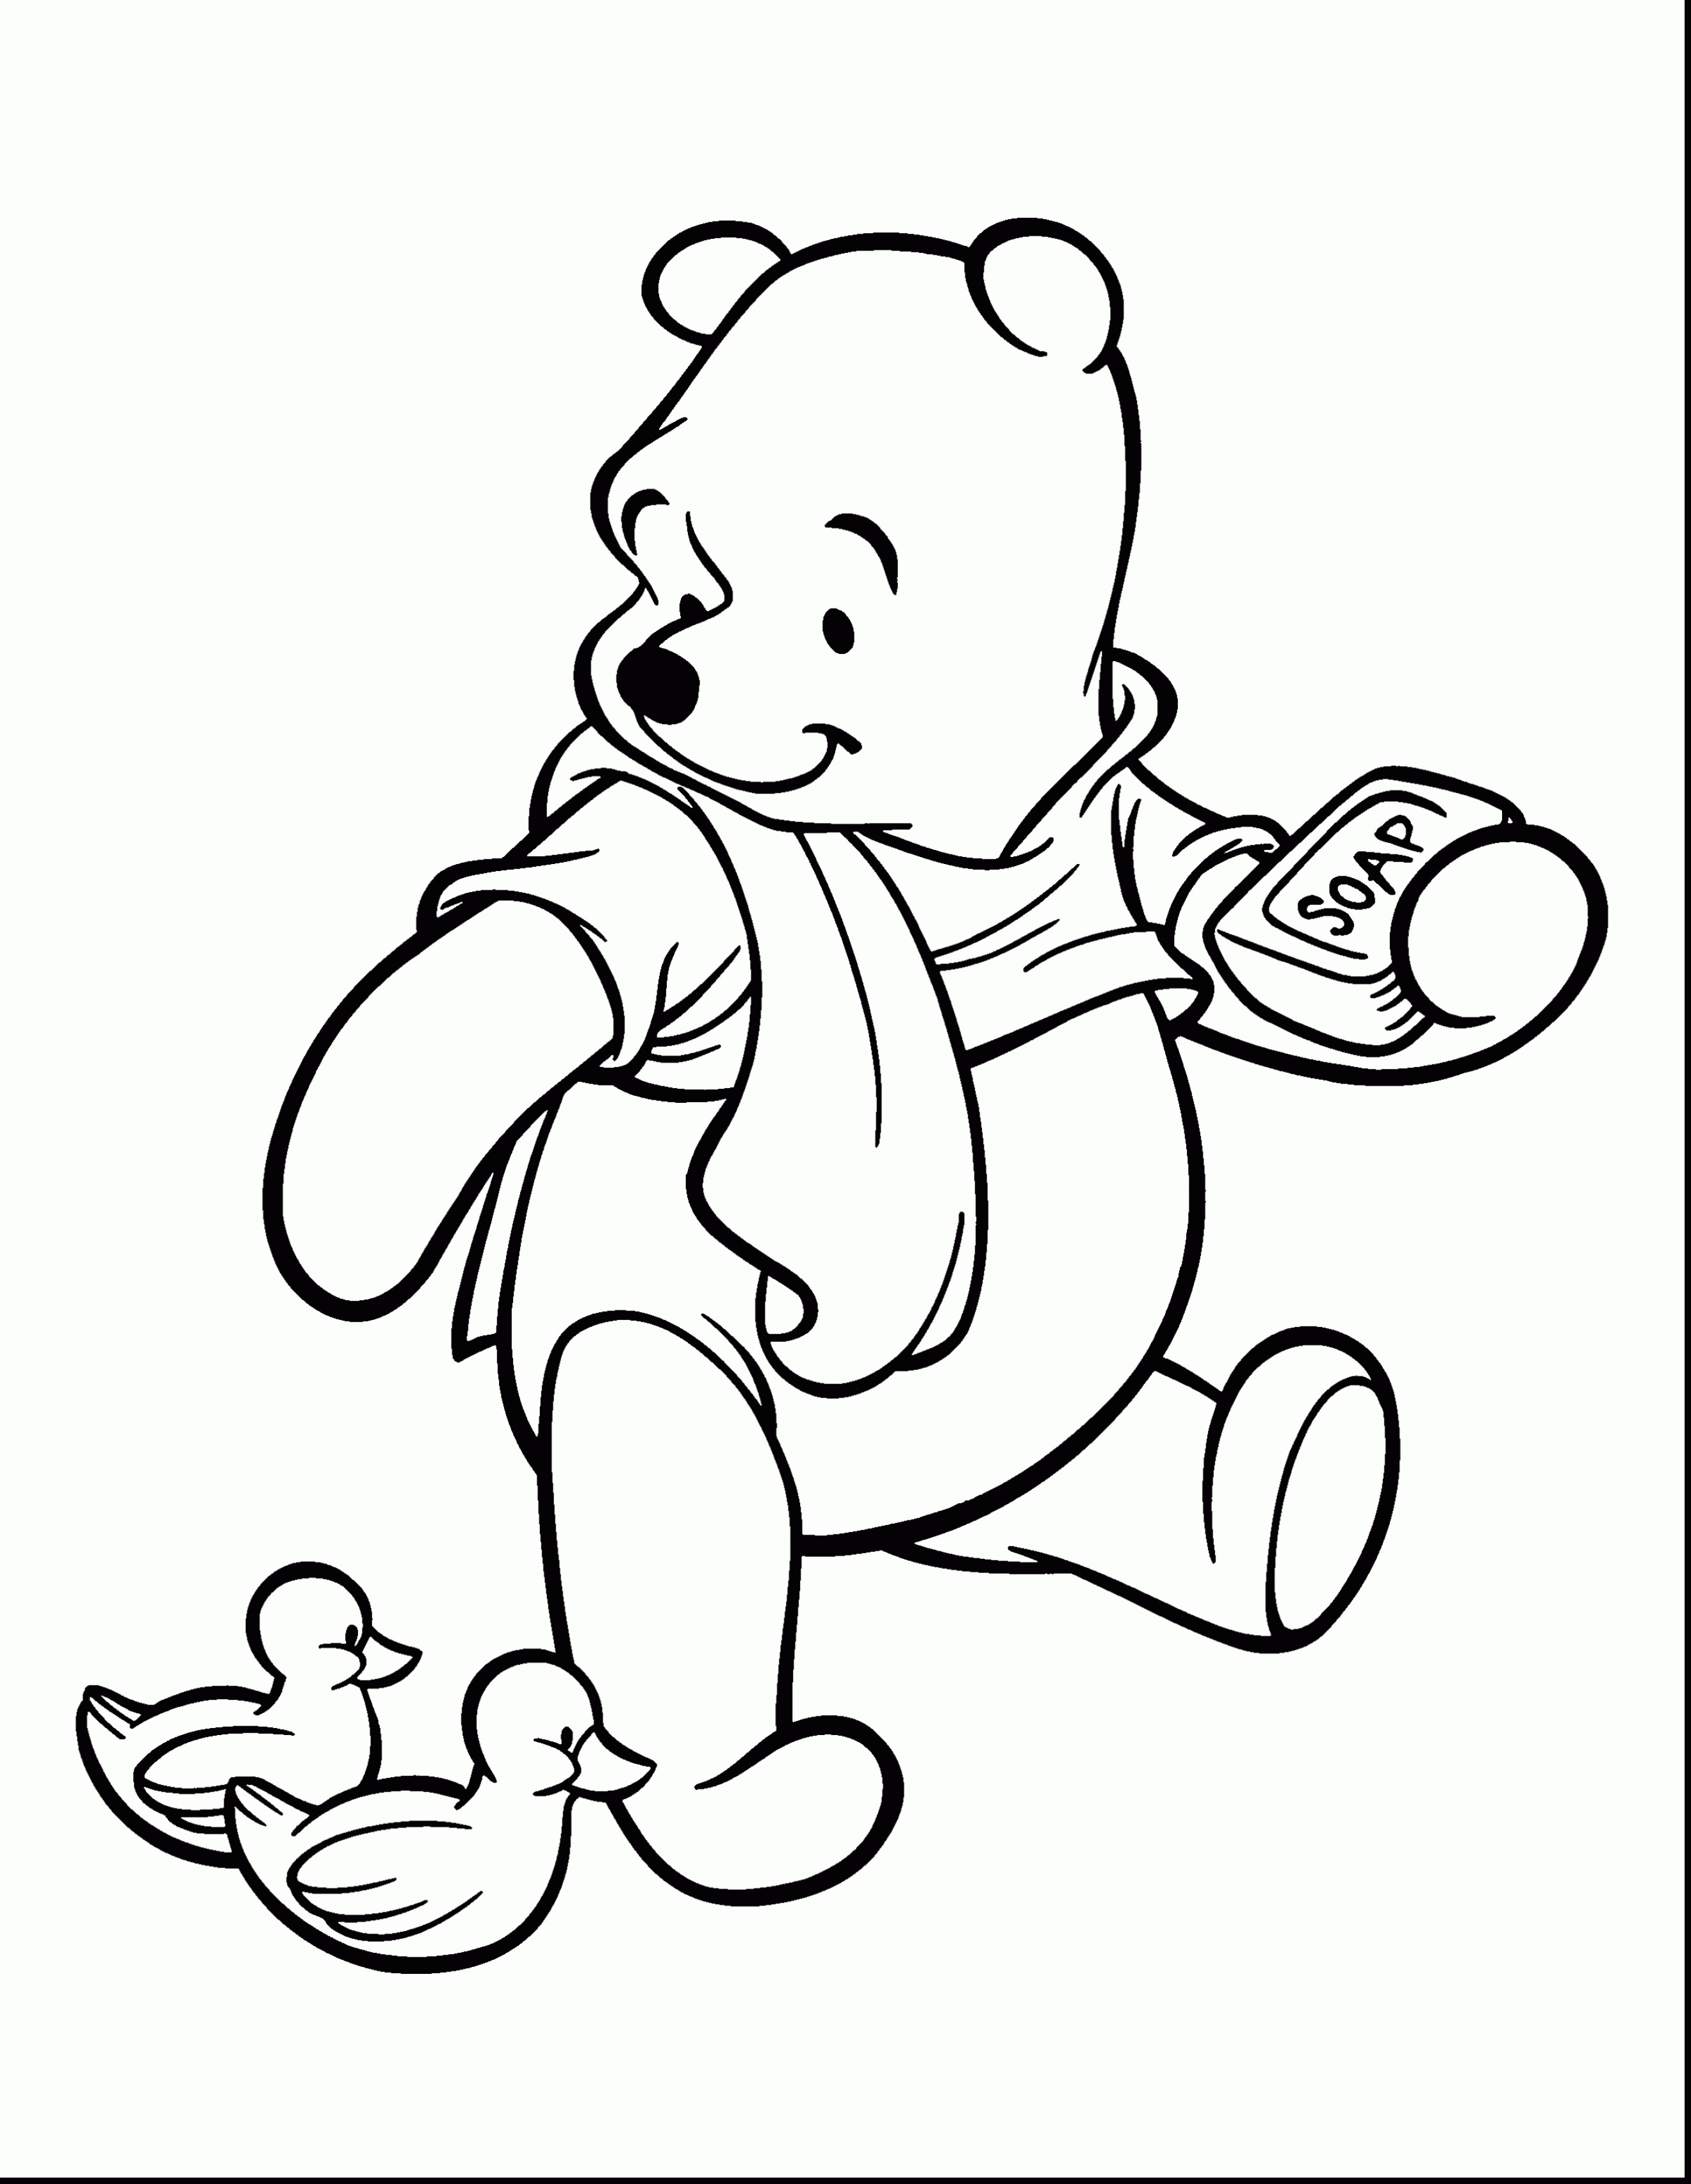 Make Your Own Coloring Pages Online at GetColorings.com | Free